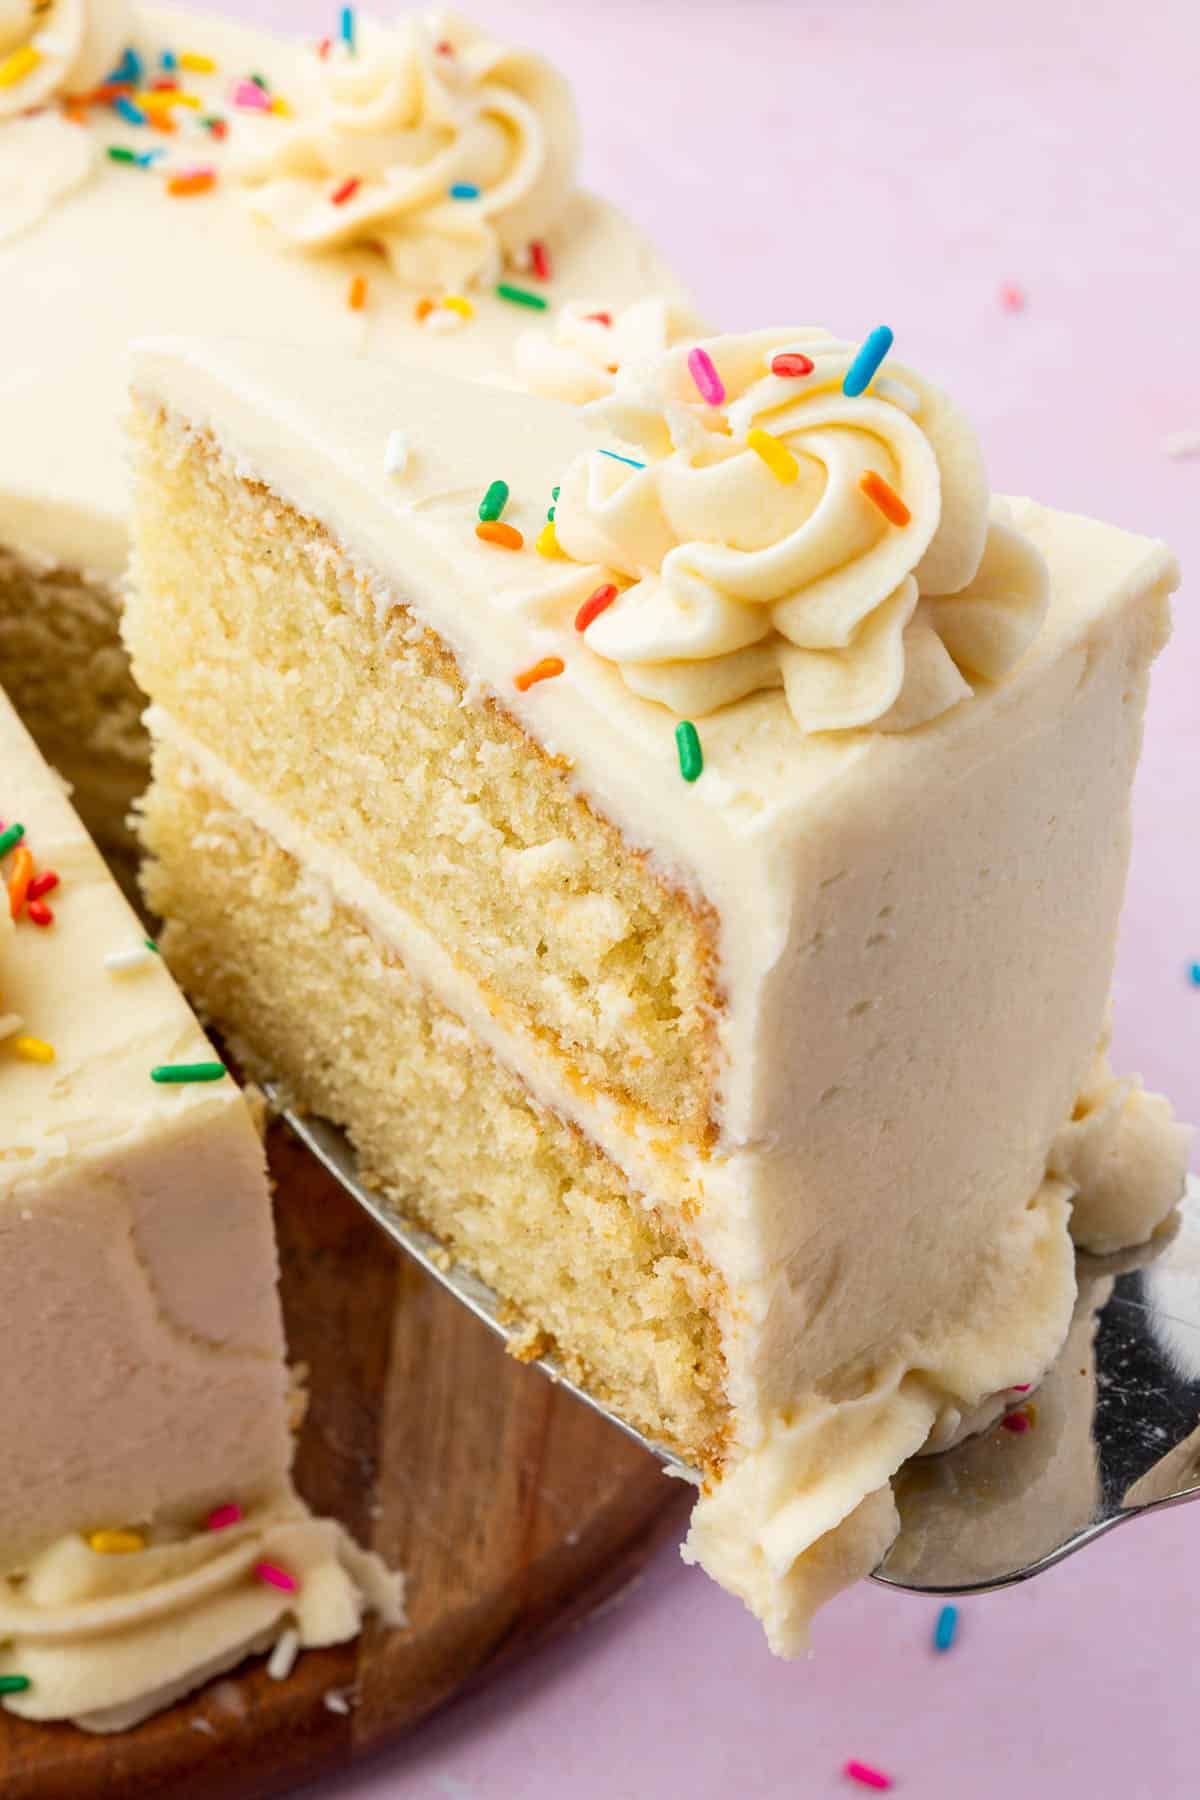 A single slice of 2-layer gluten free vanilla cake topped with rainbow sprinkles being lifted out of the larger cake.